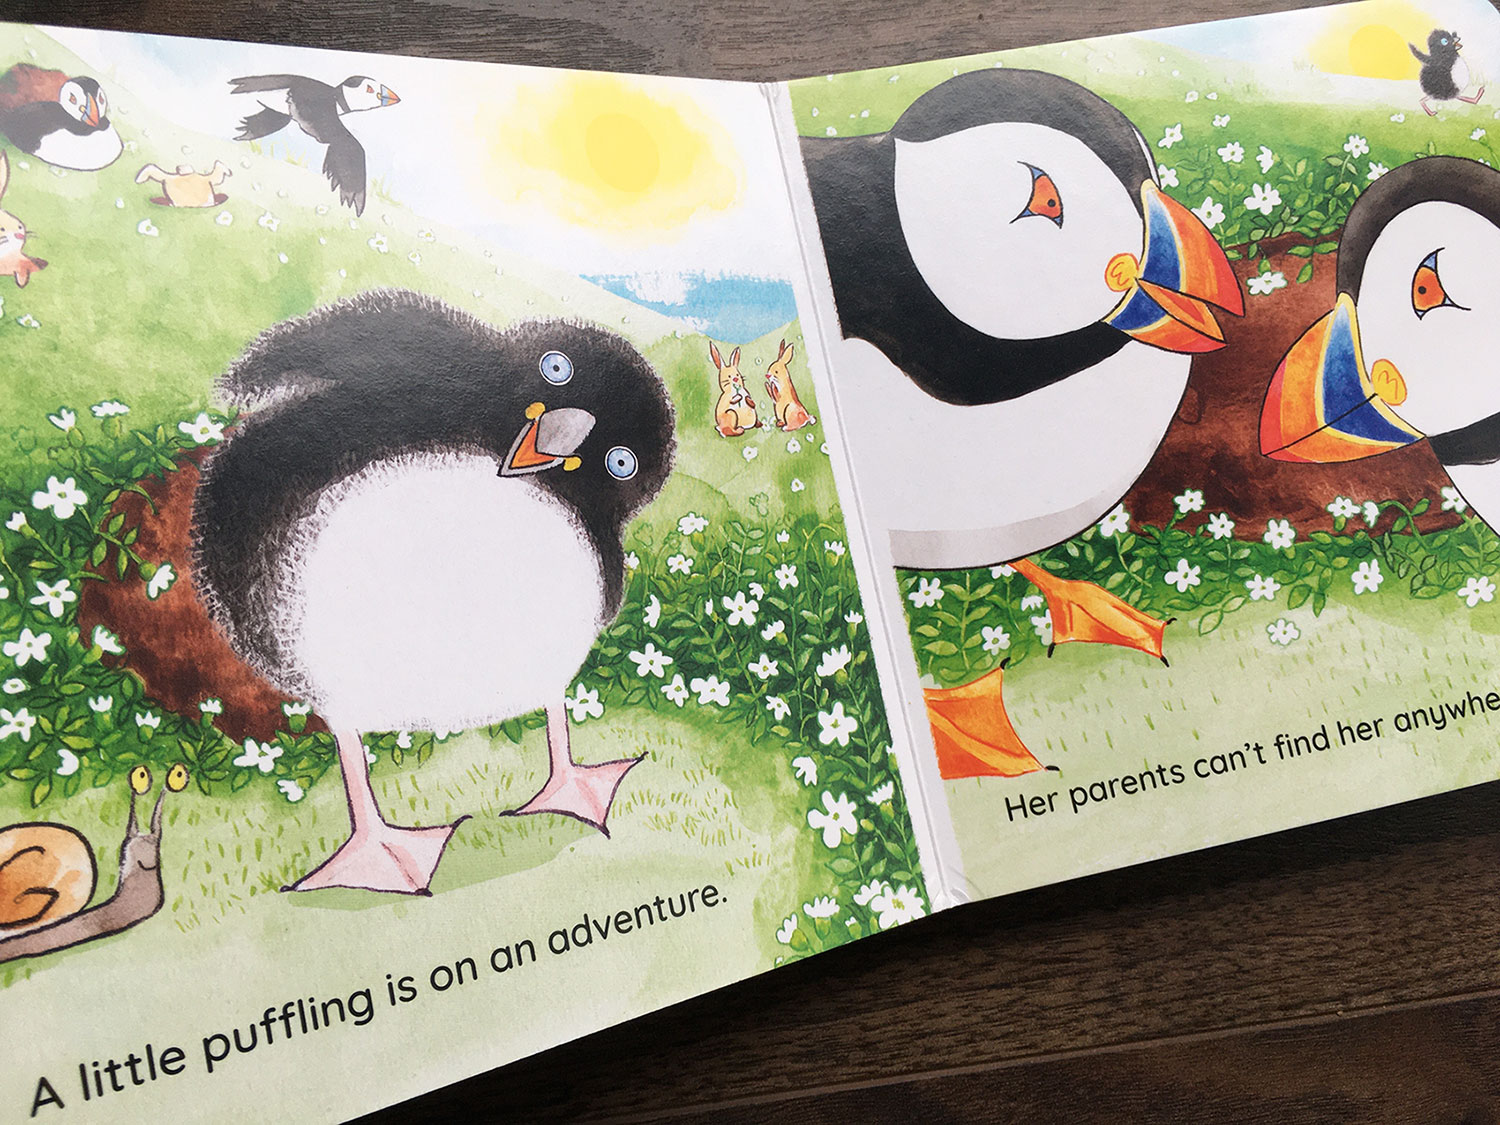 Where Are You Puffling? board book Puffling pops out of her burrow